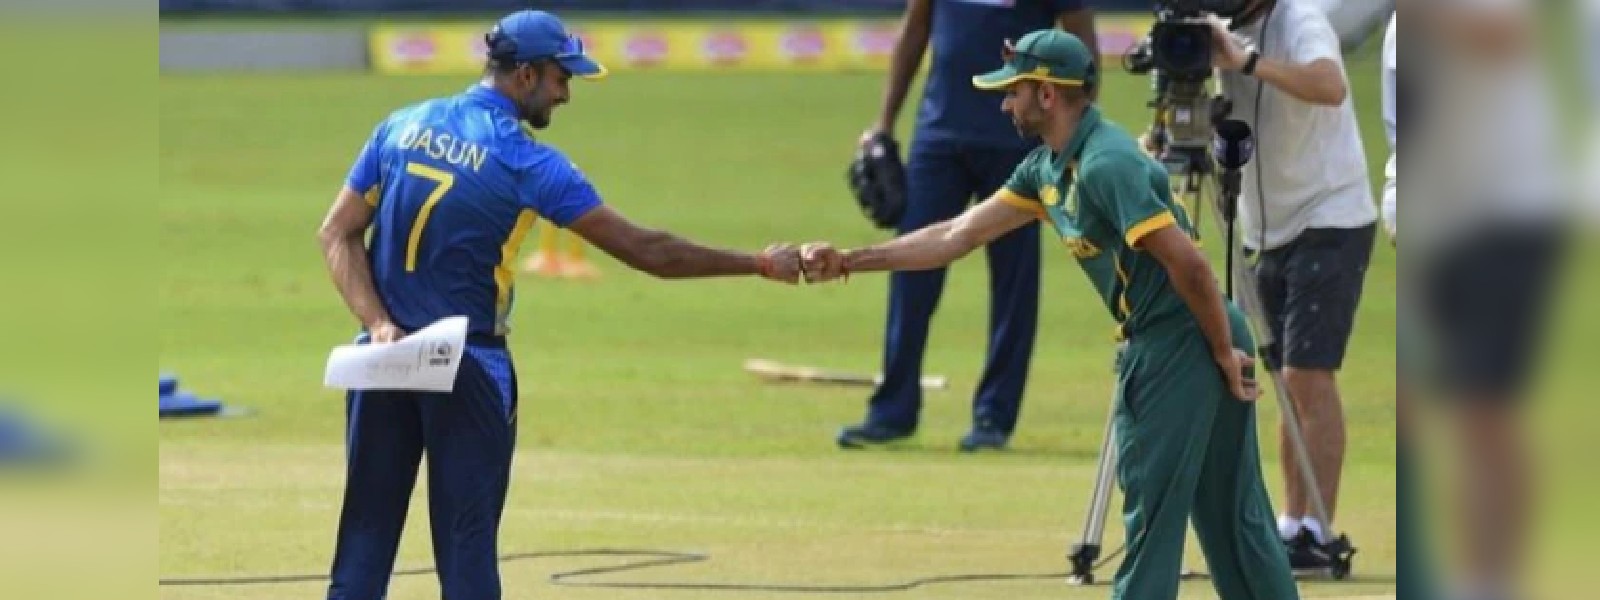 Second T20 match between Sri Lanka and South Africa today